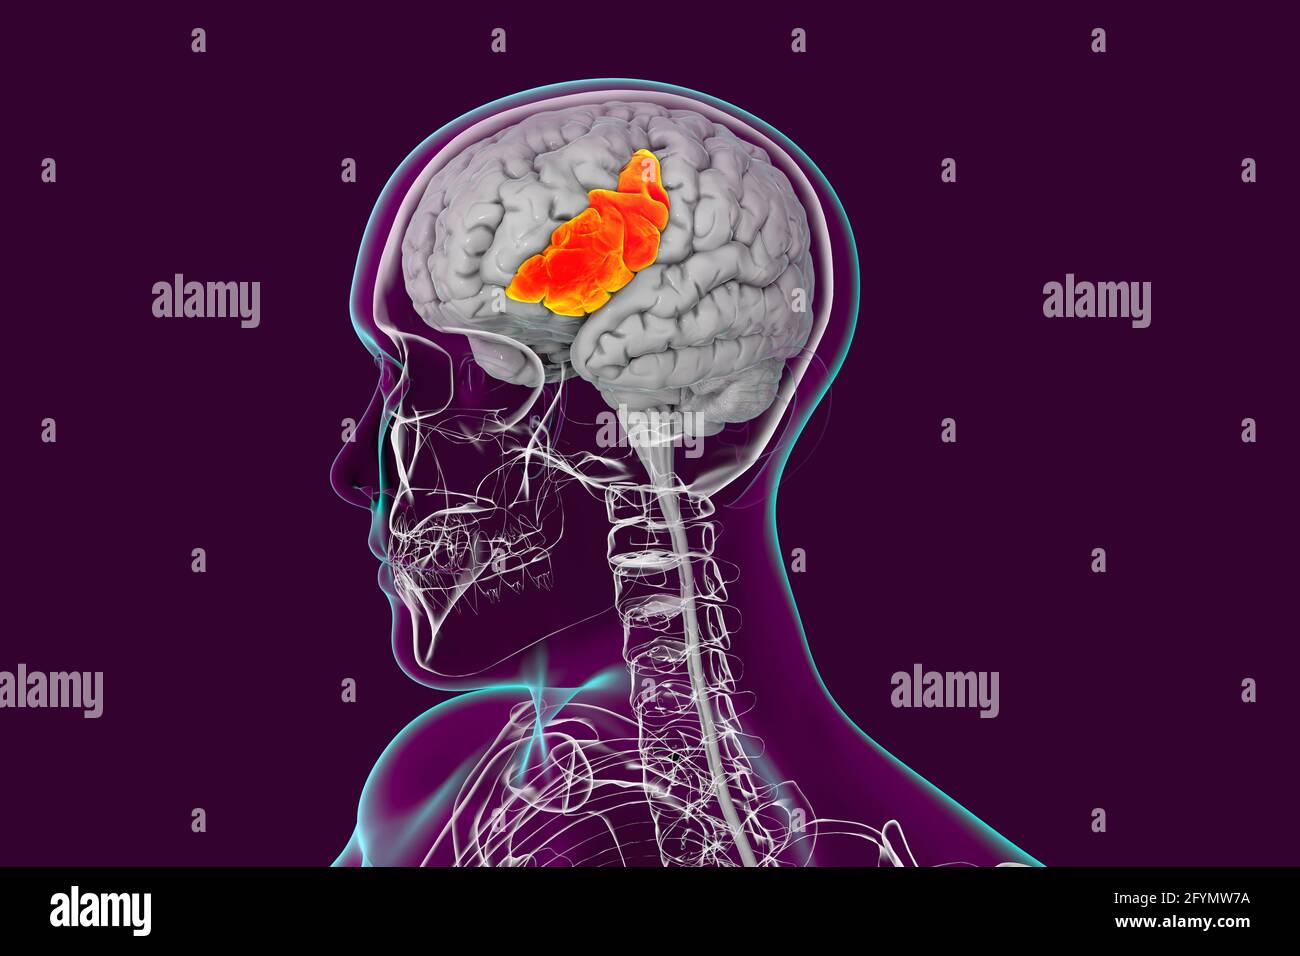 Brain with highlighted inferior frontal gyrus, illustration Stock Photo